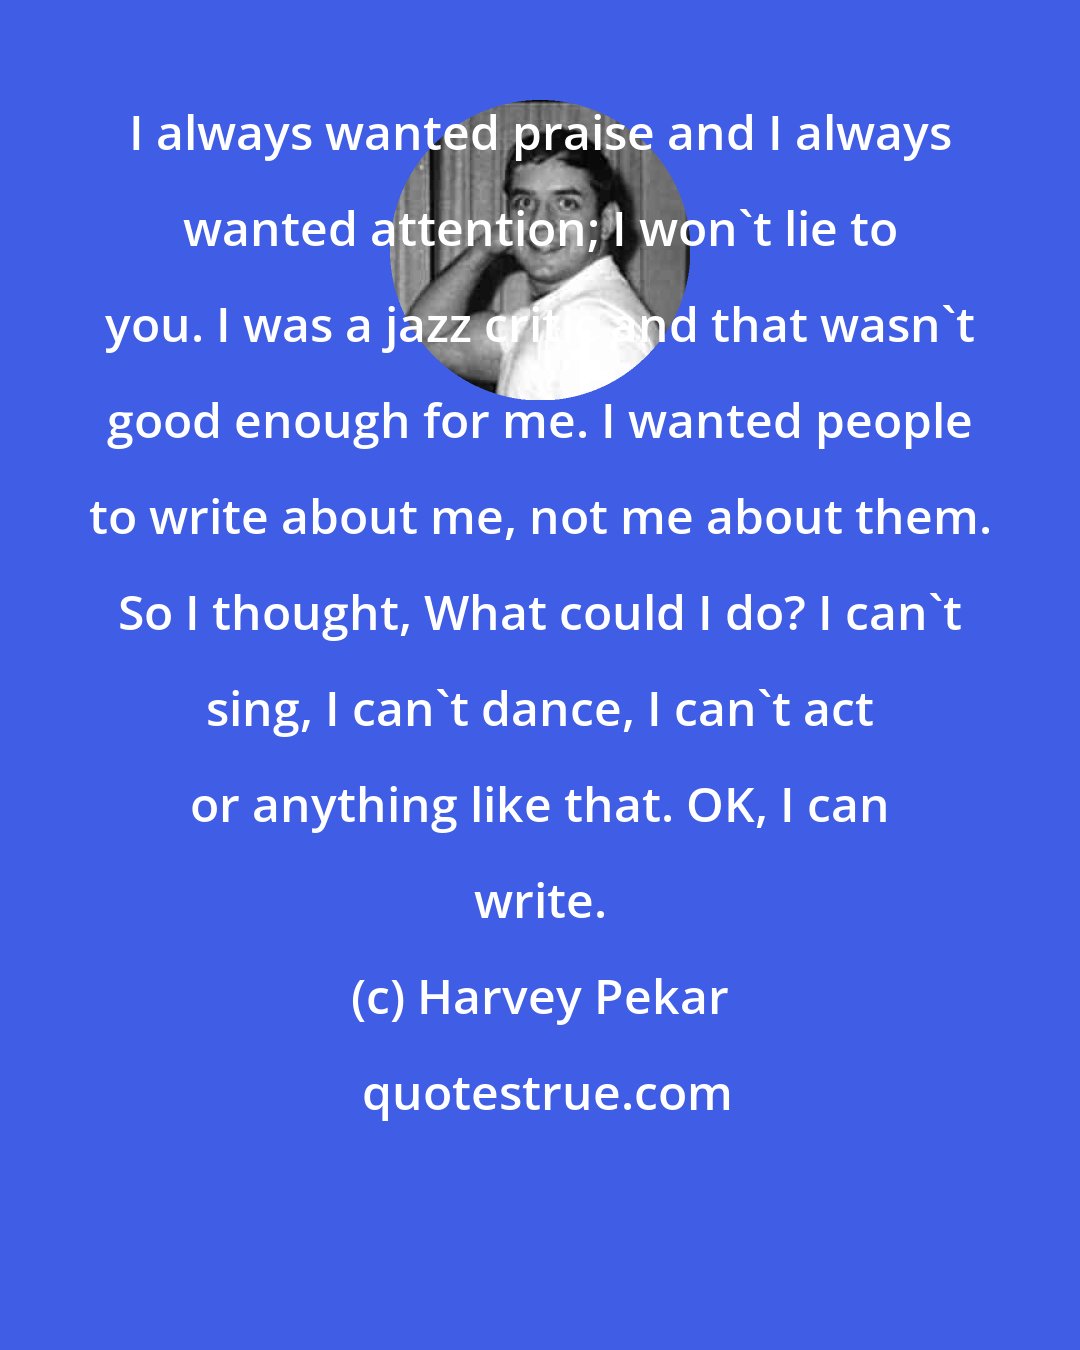 Harvey Pekar: I always wanted praise and I always wanted attention; I won't lie to you. I was a jazz critic and that wasn't good enough for me. I wanted people to write about me, not me about them. So I thought, What could I do? I can't sing, I can't dance, I can't act or anything like that. OK, I can write.